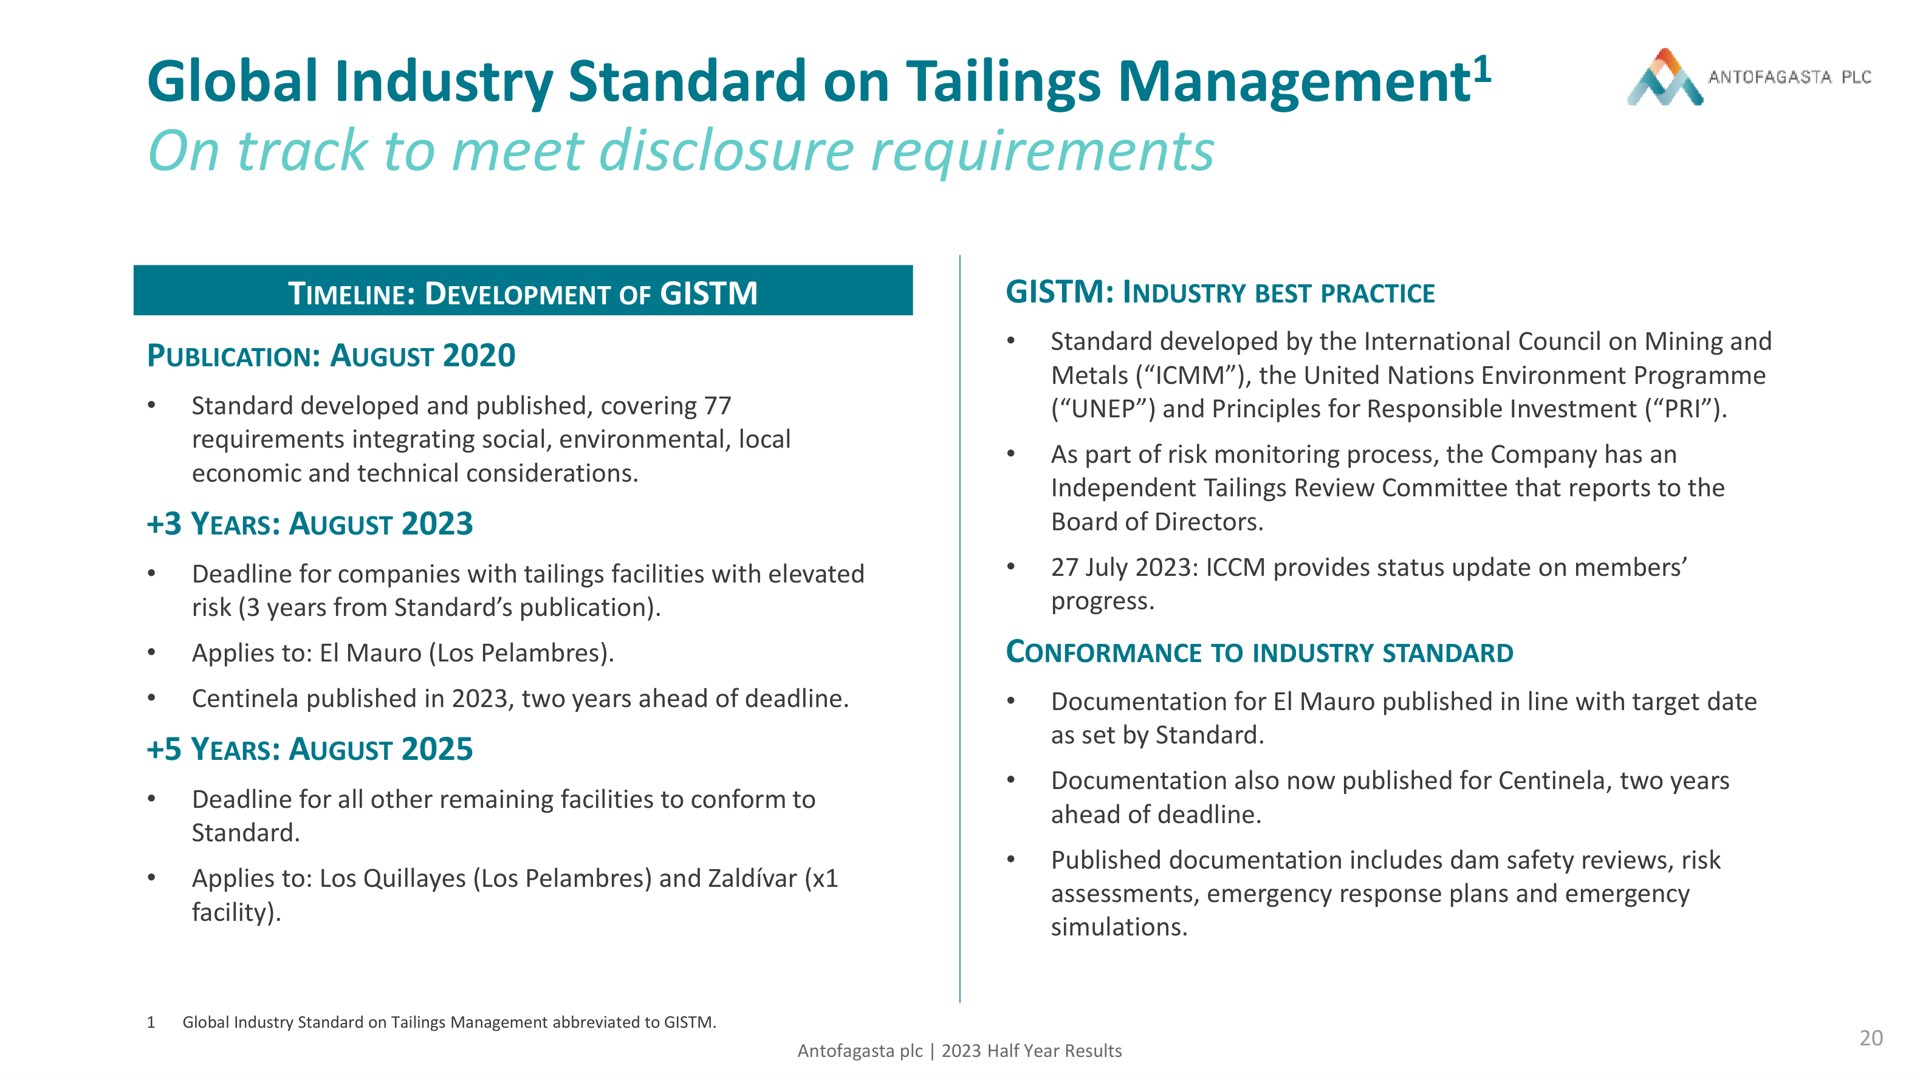 global industry standard on tailings management on track to meet disclosure requirements peer management | Antofagasta